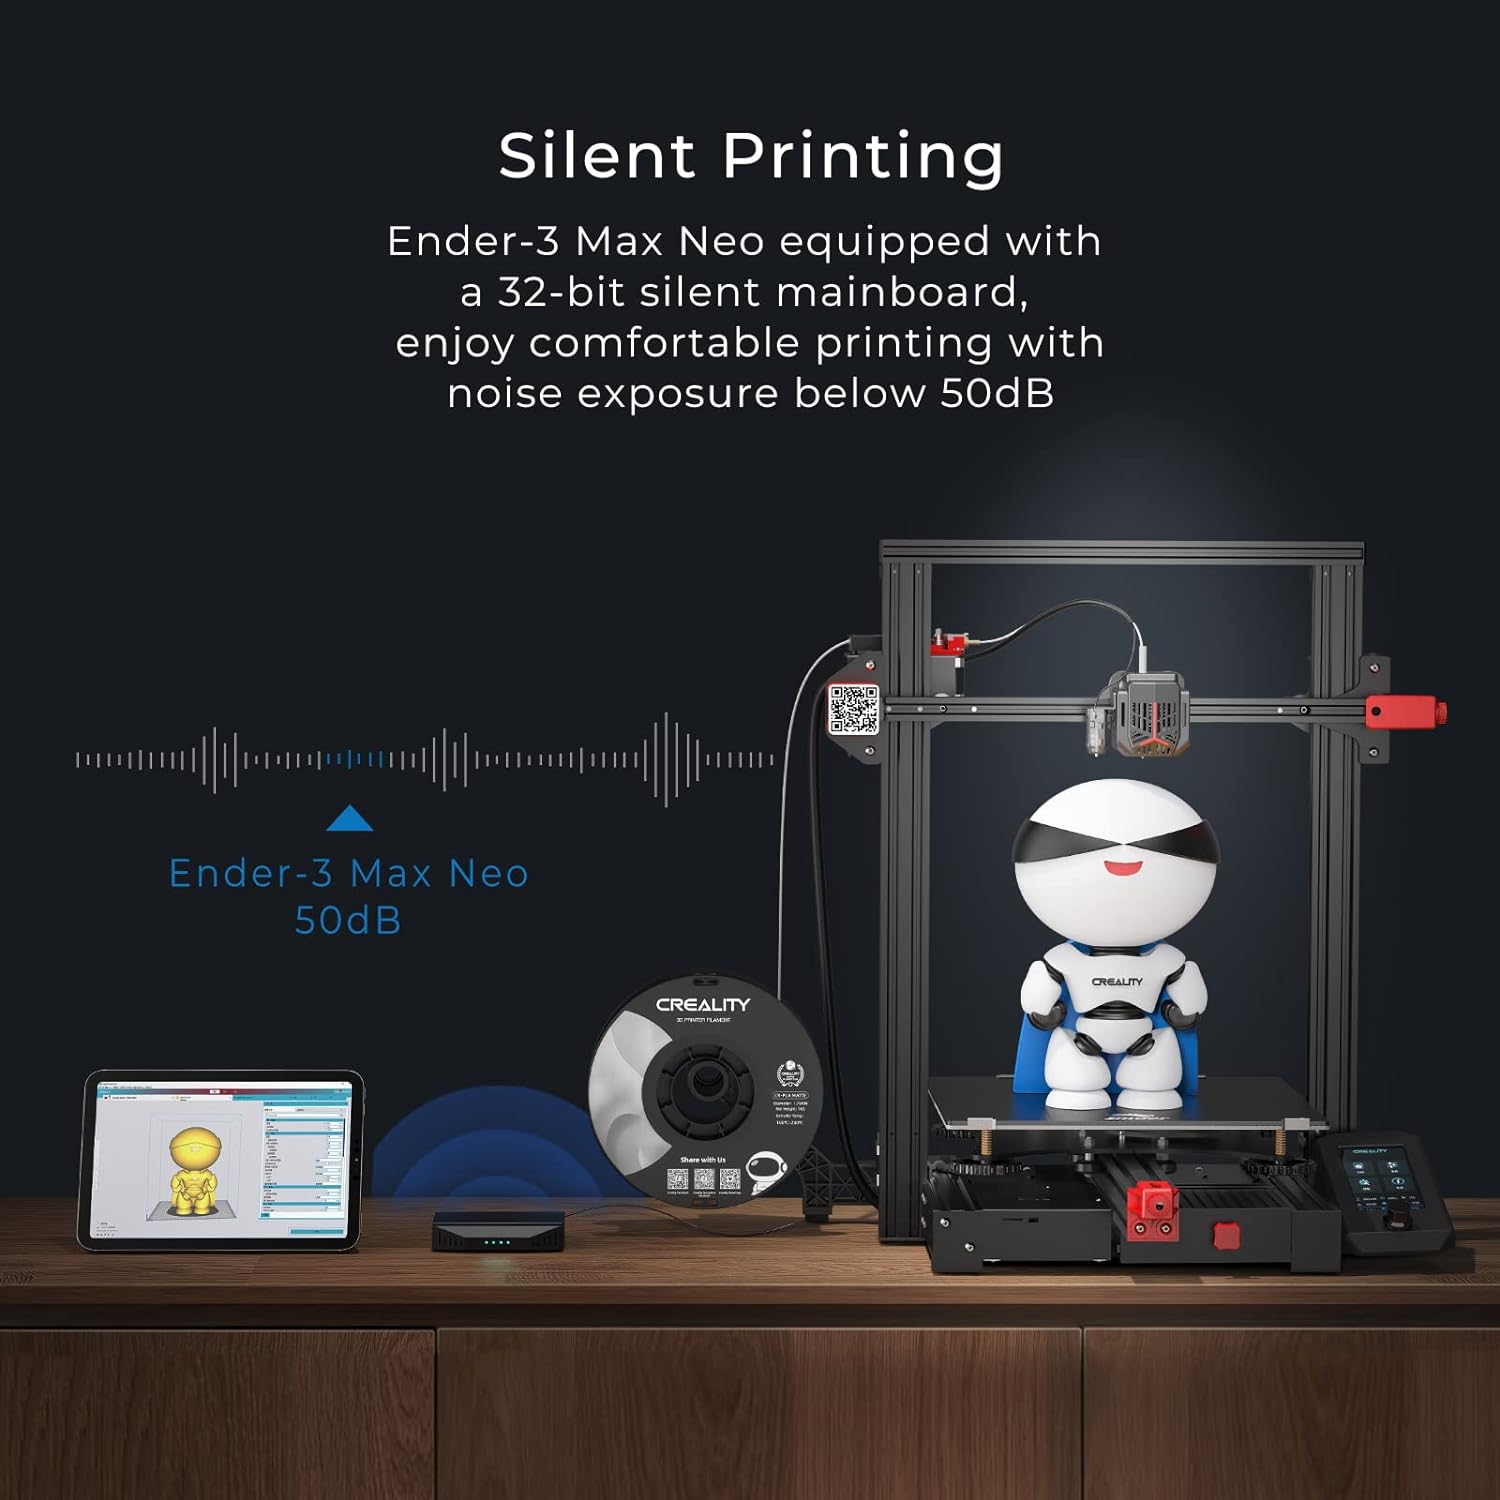 creality-ender-3-max-neo-3d-printer-cr-touch-auto-leveling-dual-z-axis-full-metal-extruder-silent-mainboard-filament-sen-1 Creality Ender 3 Max Neo 3D Printer Review